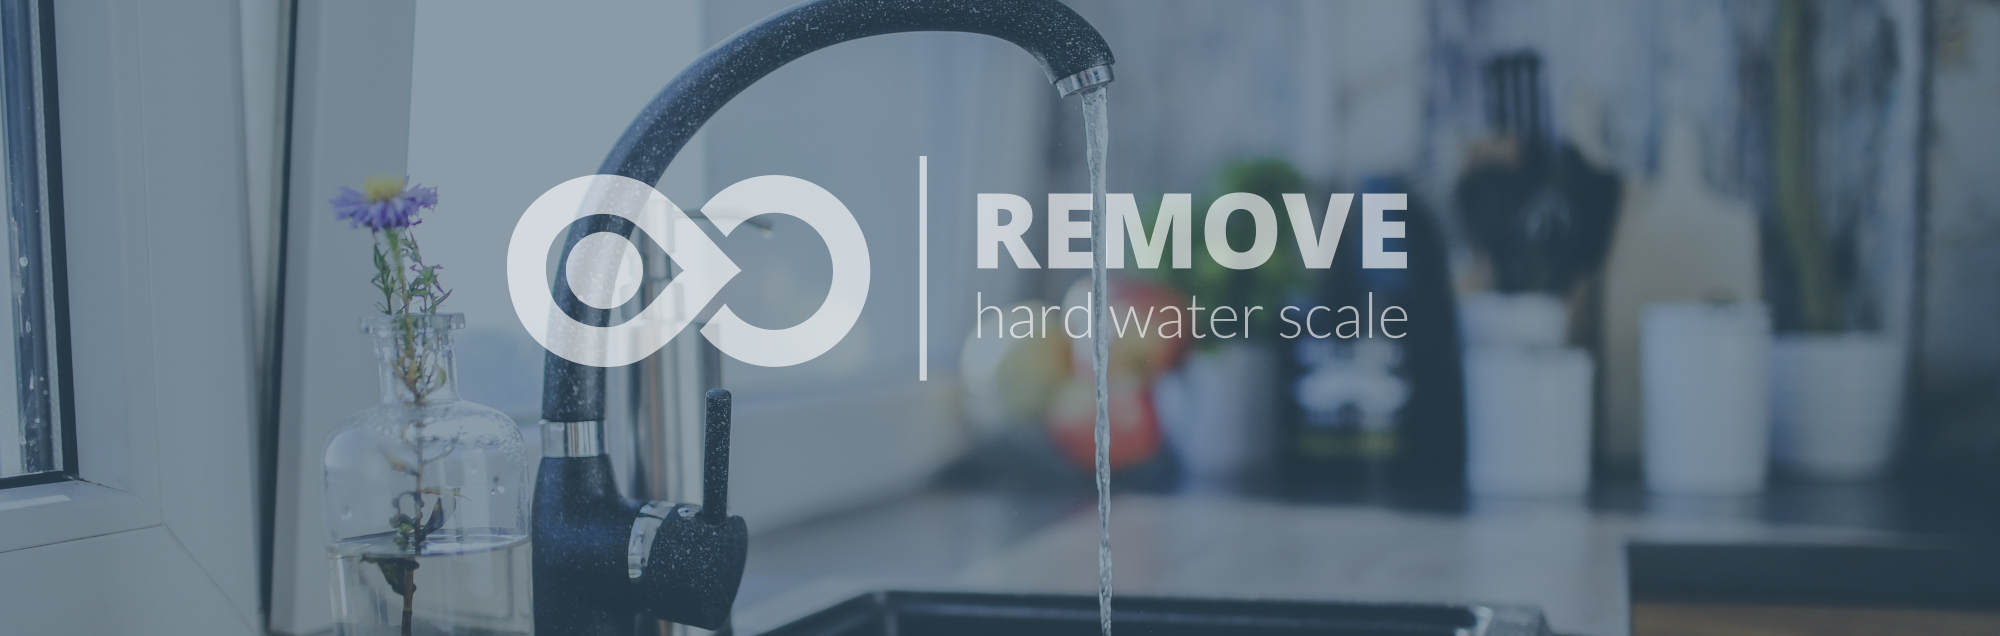 remove hard water scale residential home